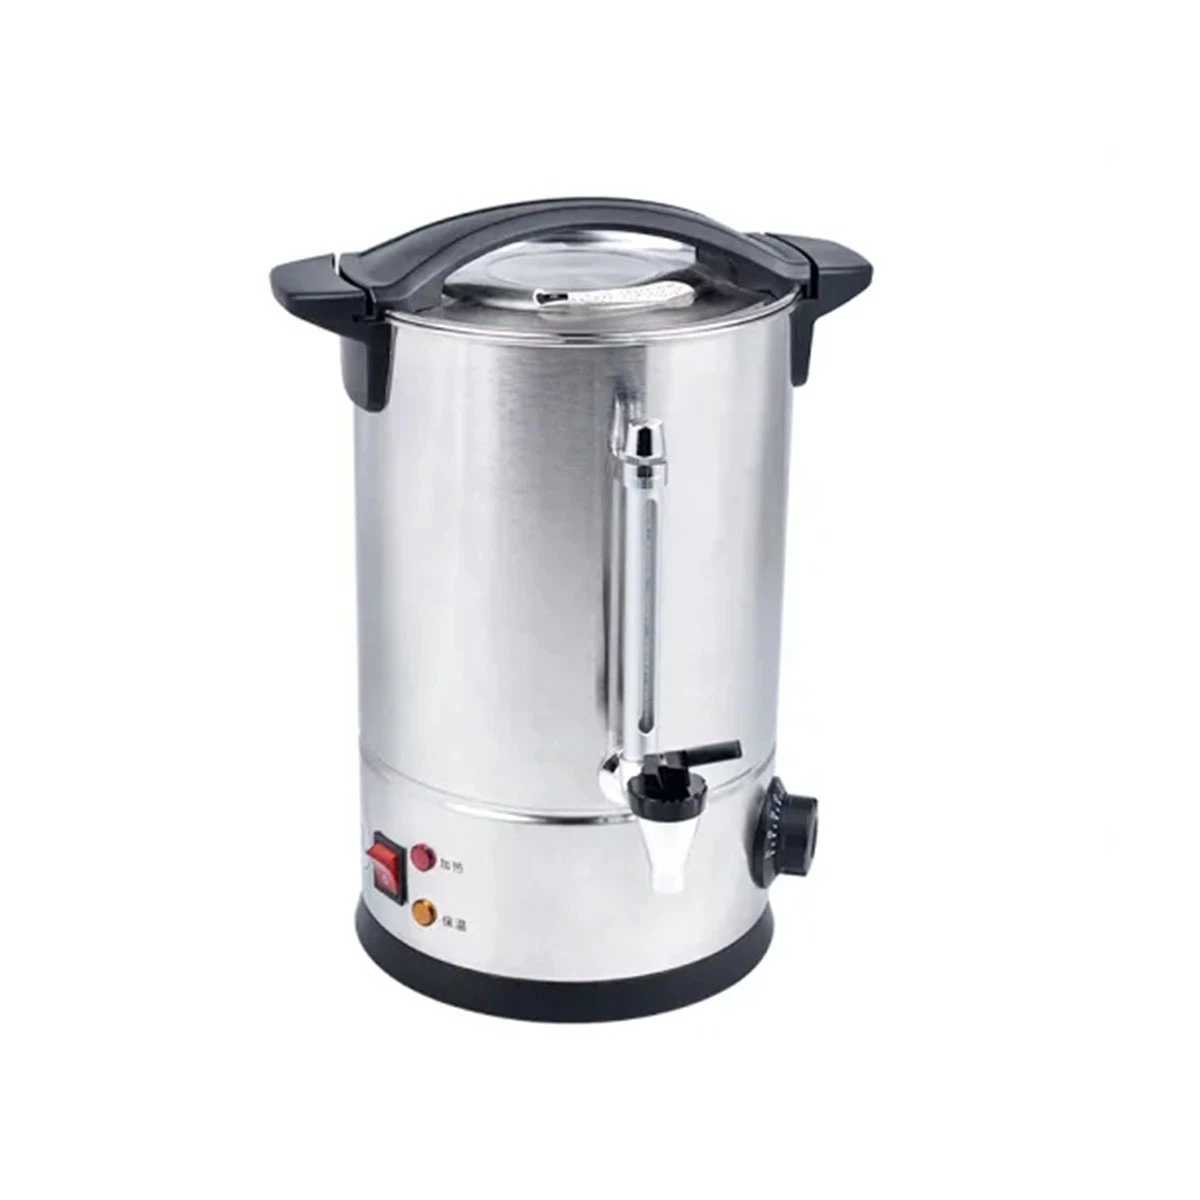 High Quality Home Household Best Stainless Steel Electric Coffee Percolator Maker Machine Kitchen Appliance